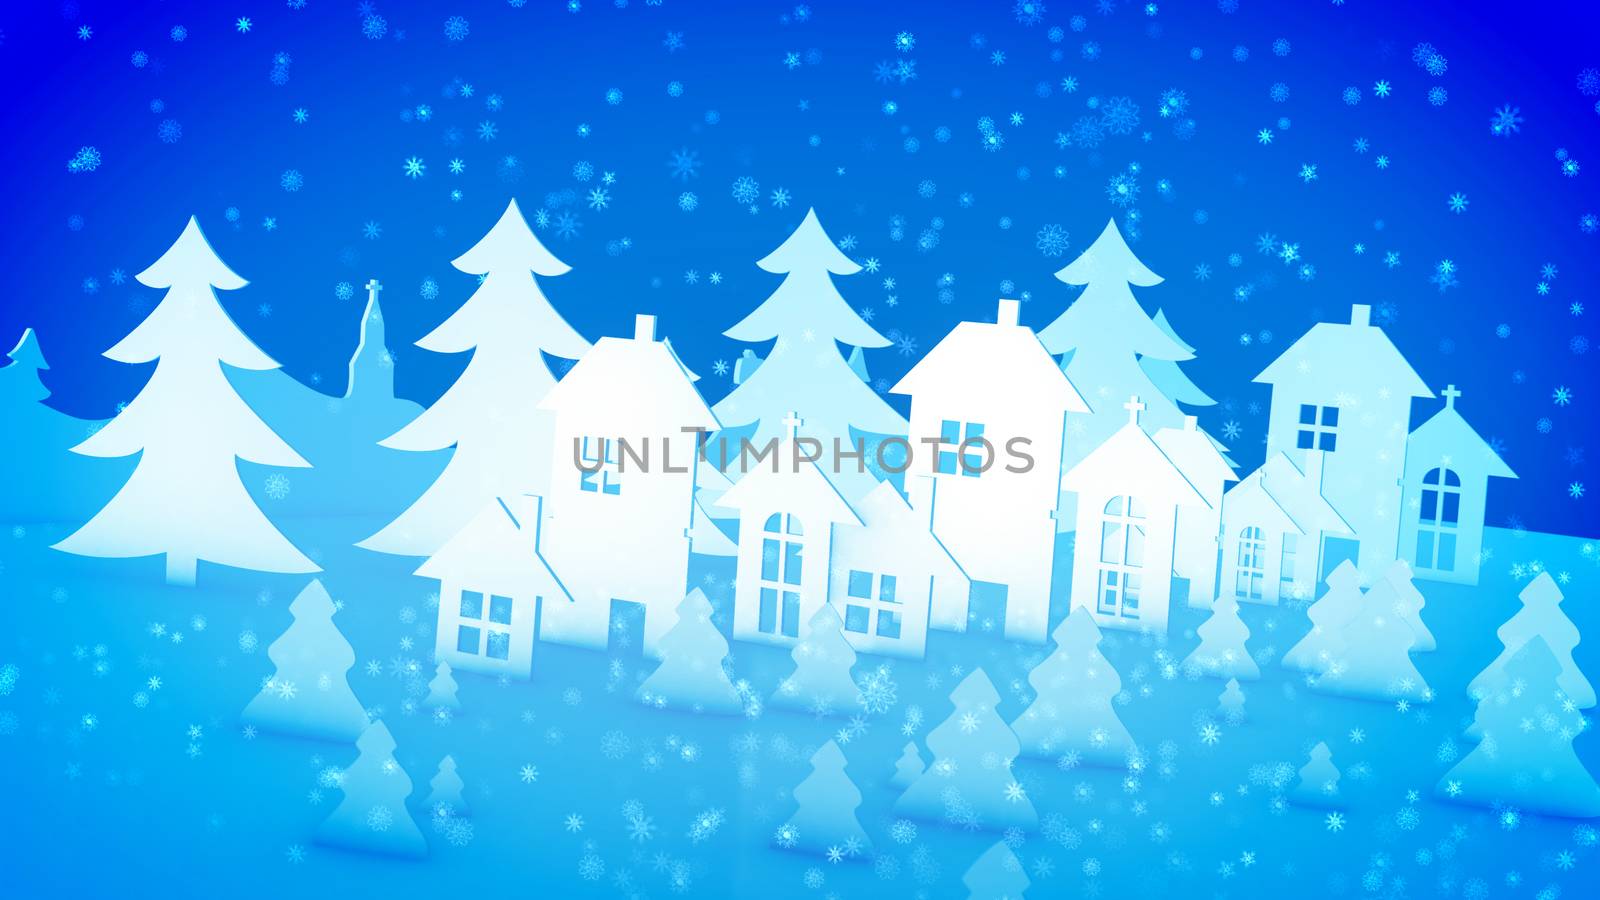 Cheerful 3d illustration of Christmas paper houses and churches with windows and chimneys for Santa Claus and fir trees under falling snowflakes. They generate the mood of celebration.